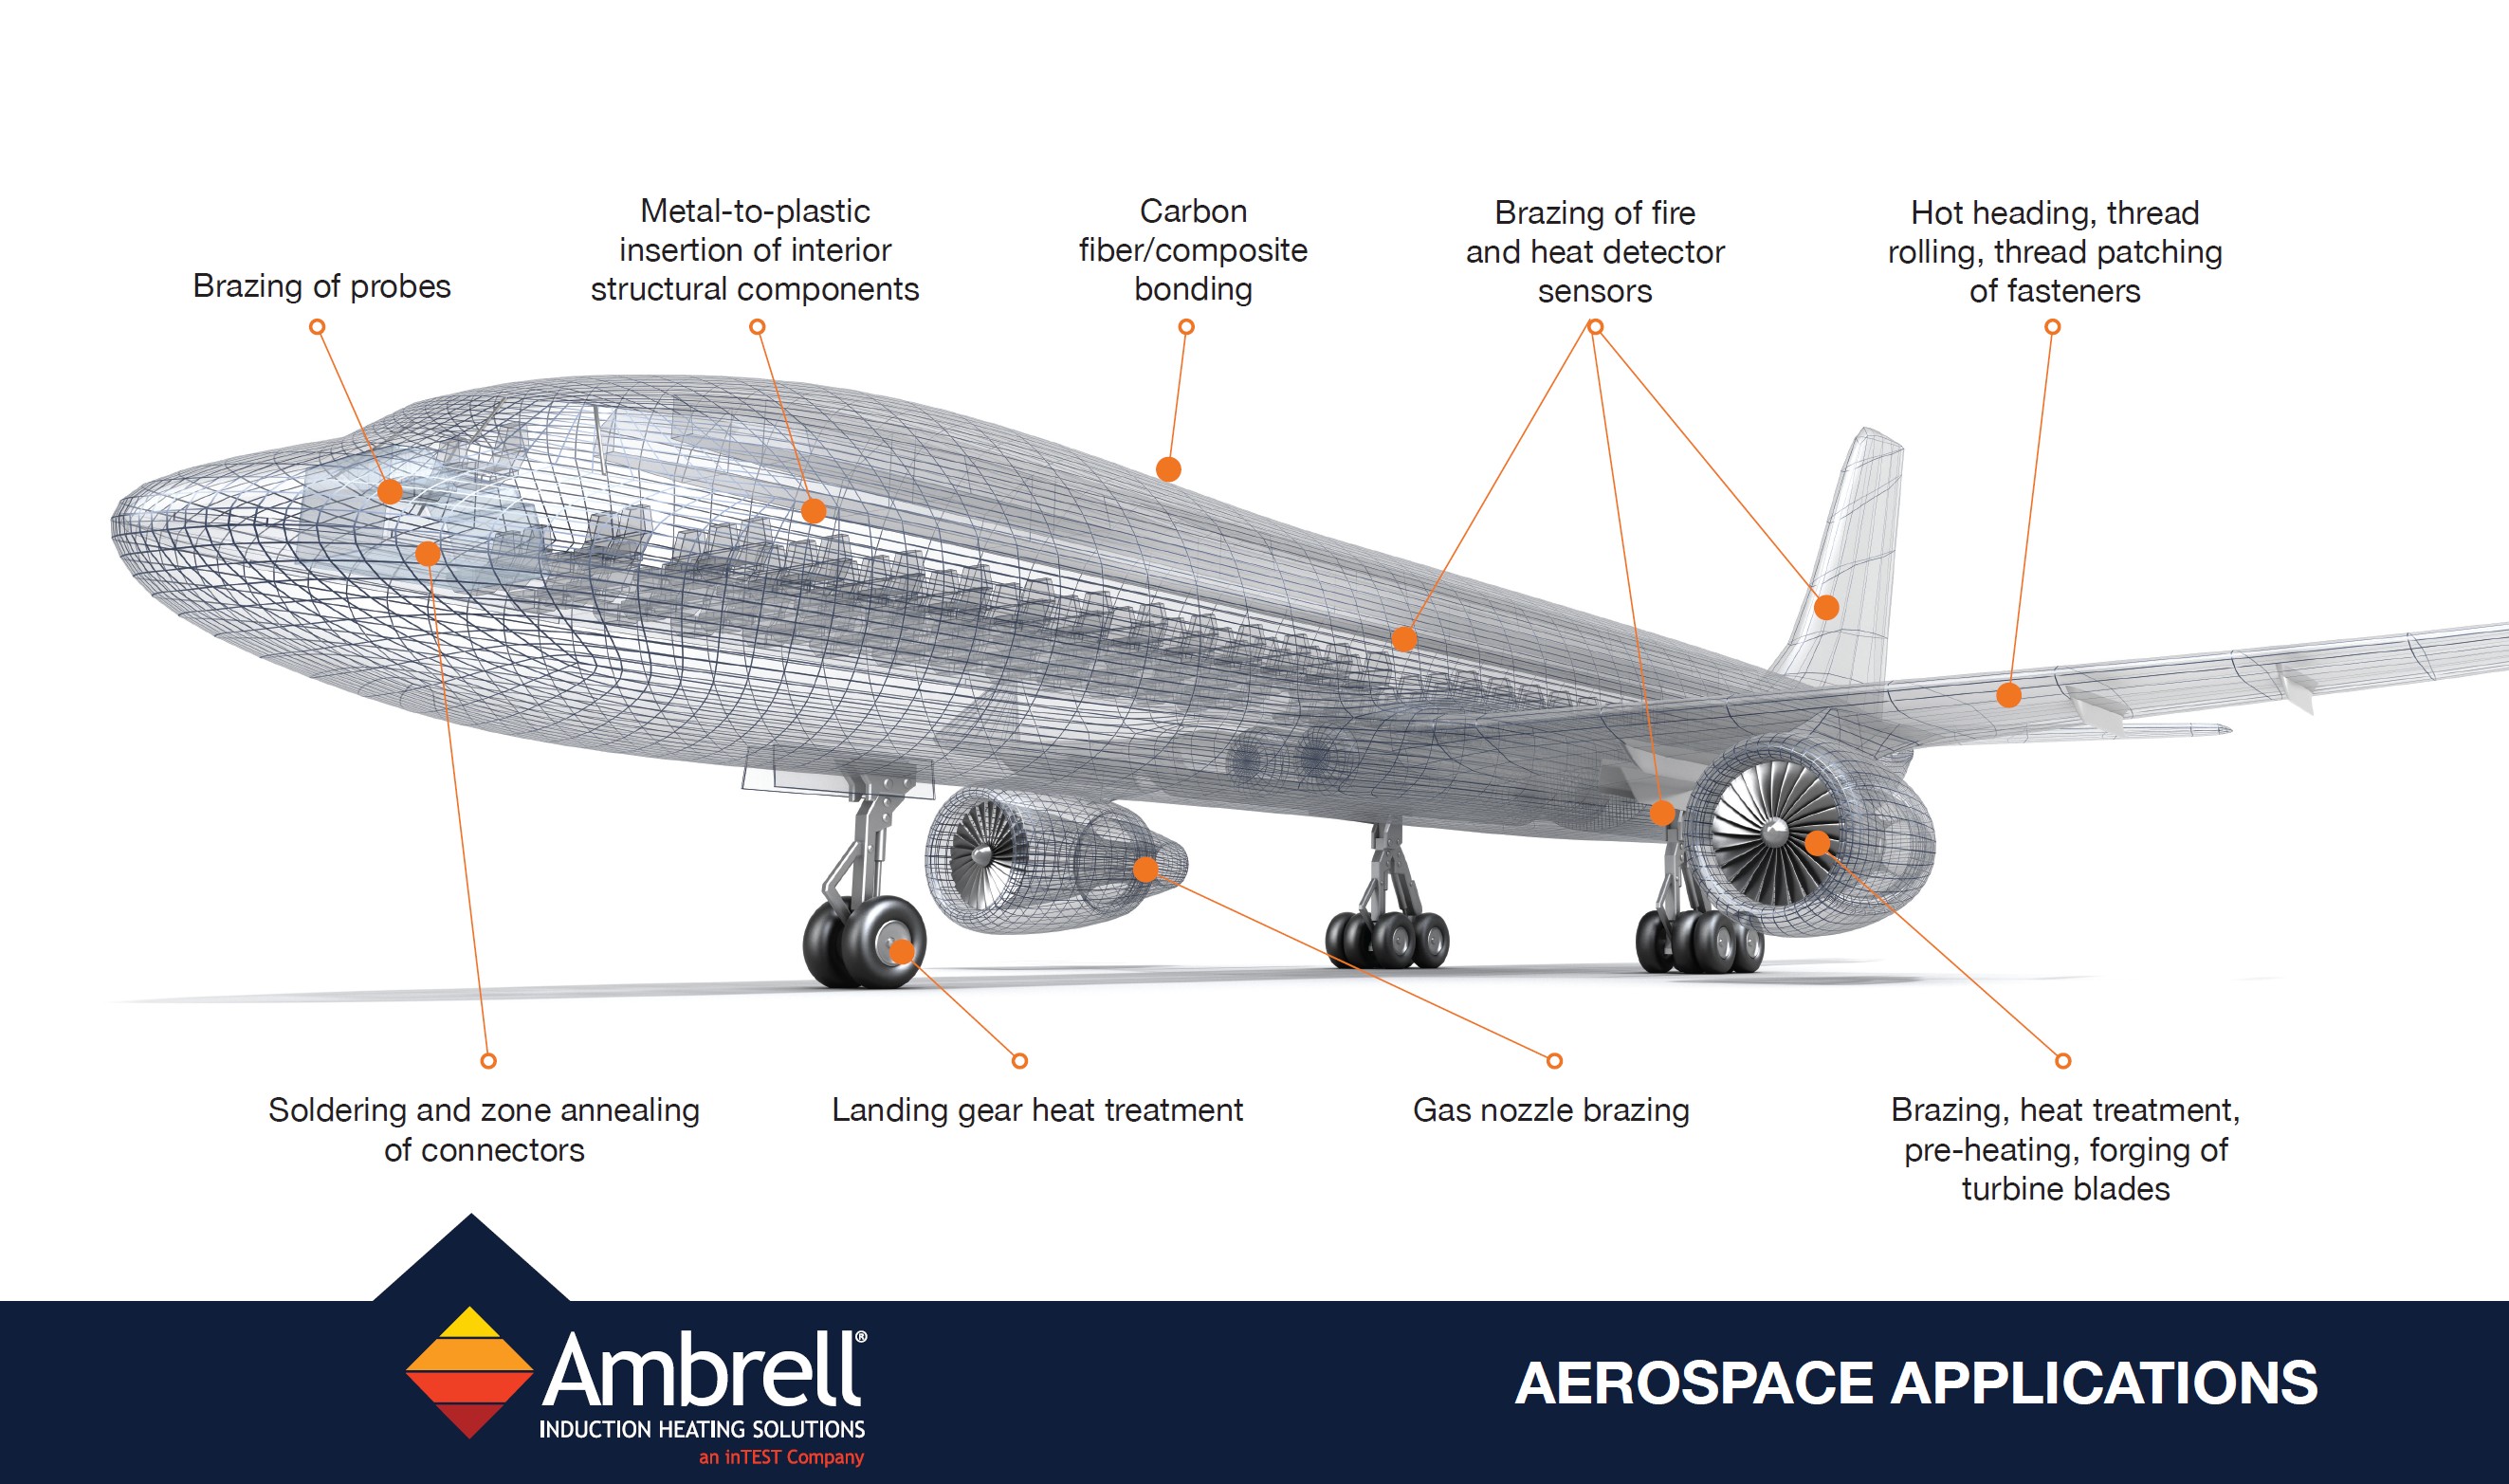 Induction heating applications in aerospace and defense